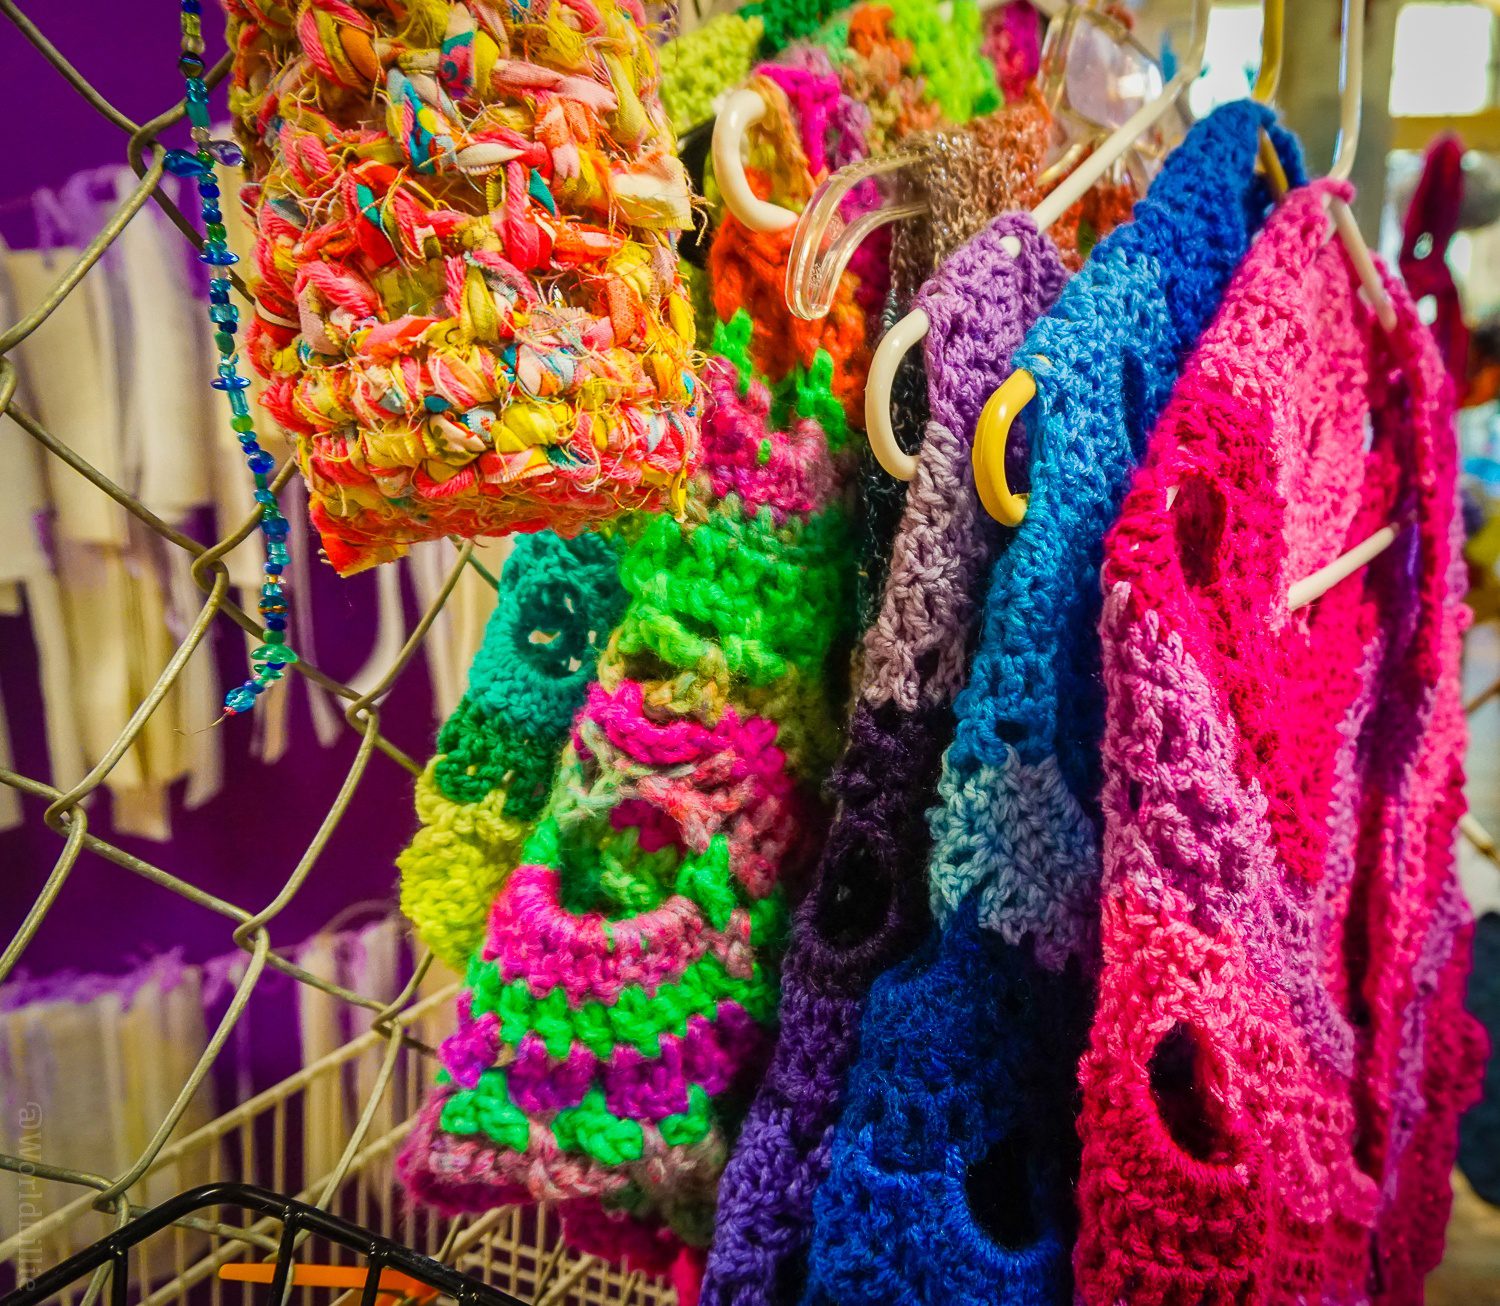 The artist who knit these shawls, "Q," is also a lawyer!